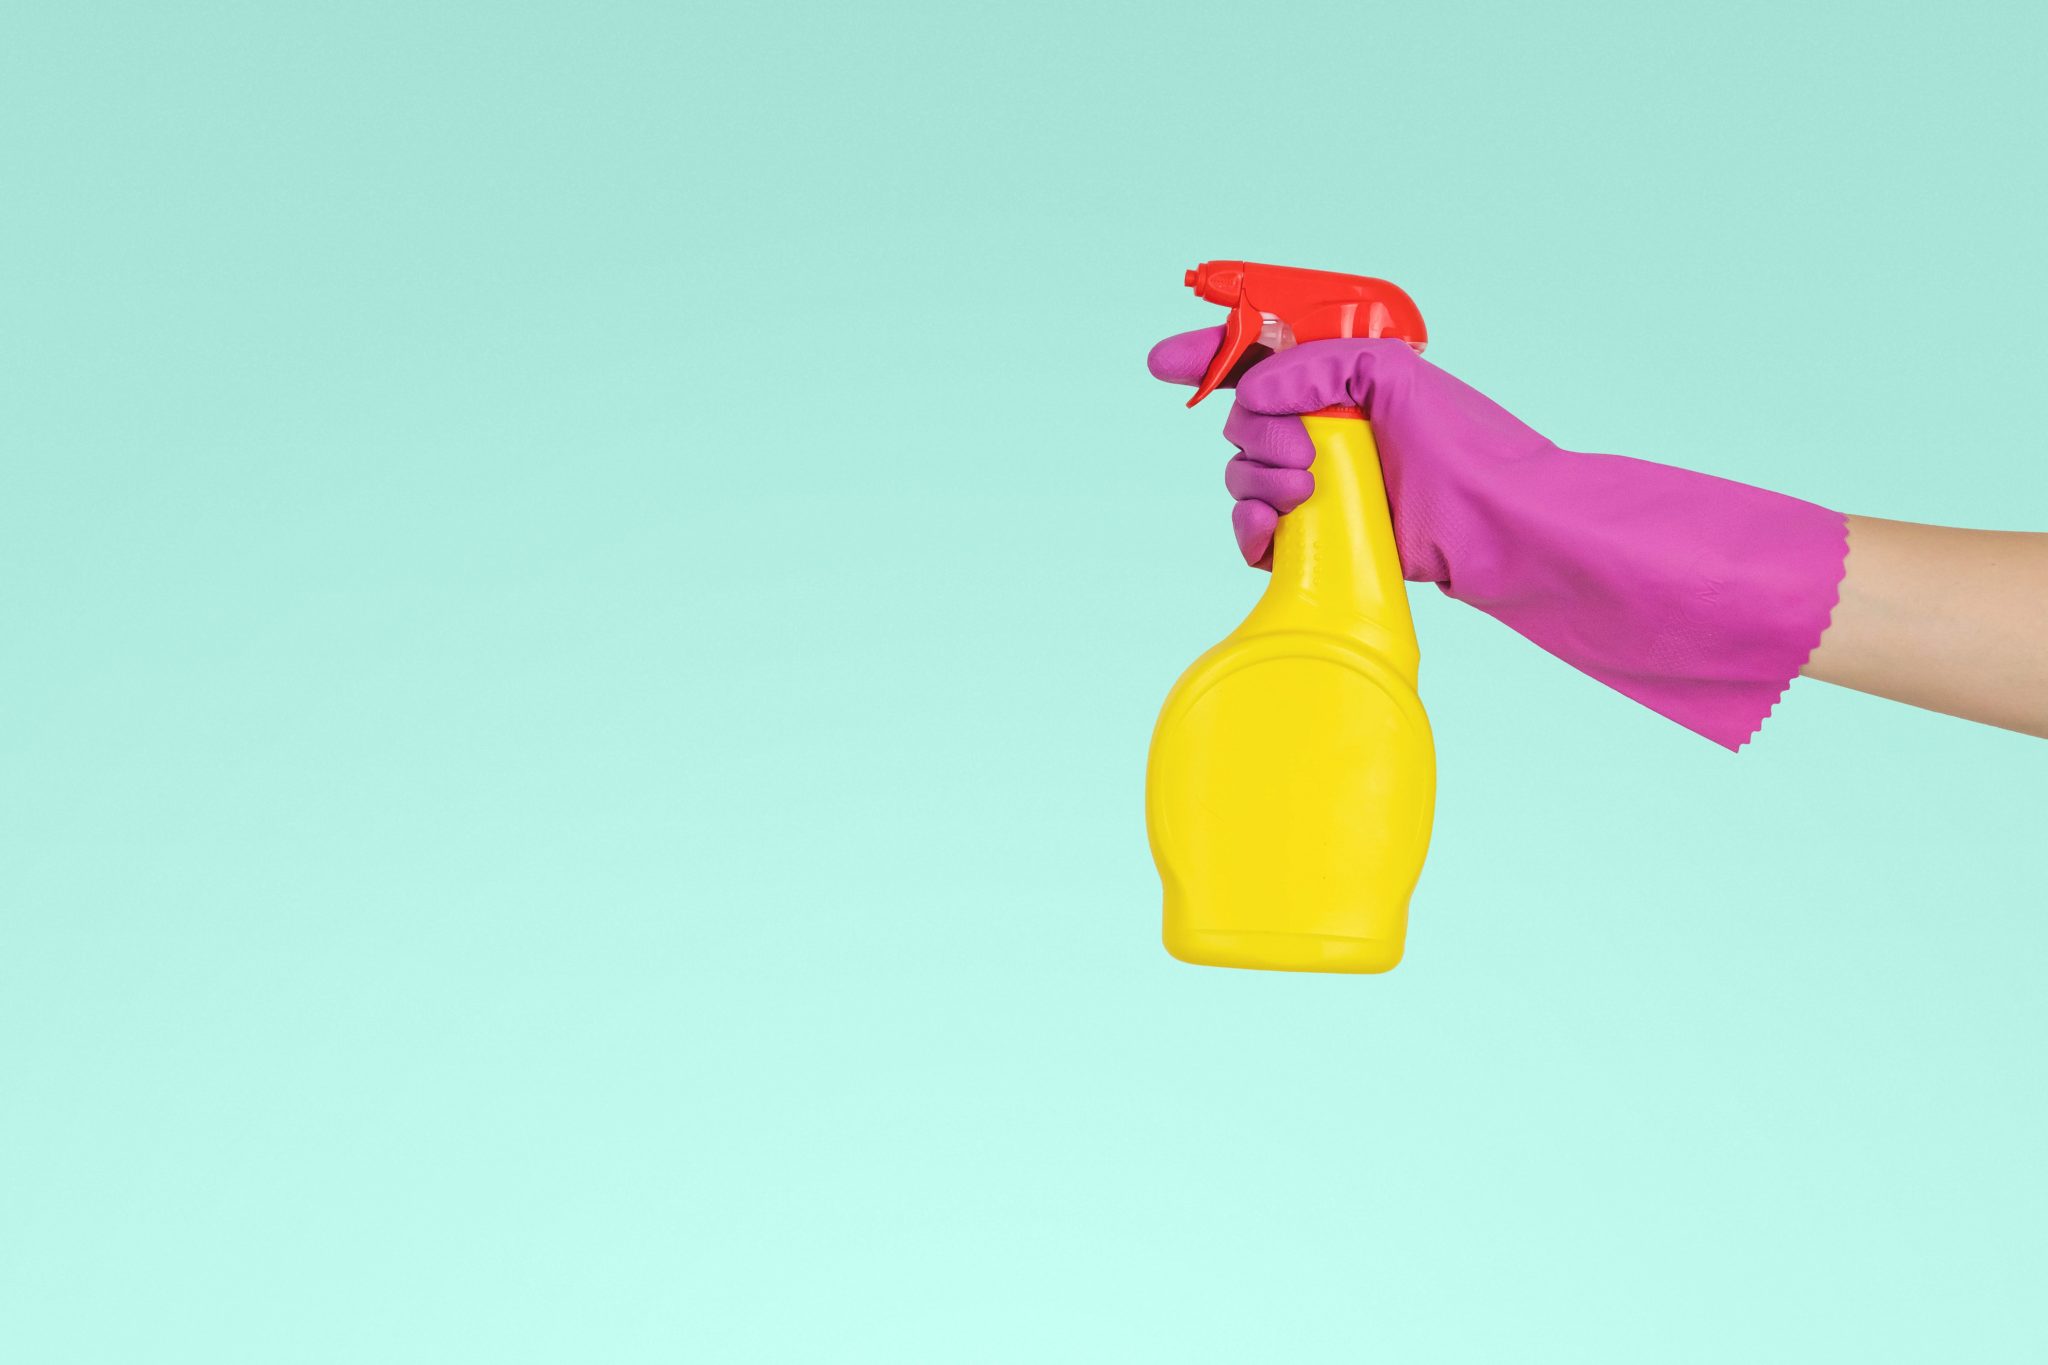 image of a pink dish glove holding a yellow disinfectant bottle for COVID-19 against a light blue background